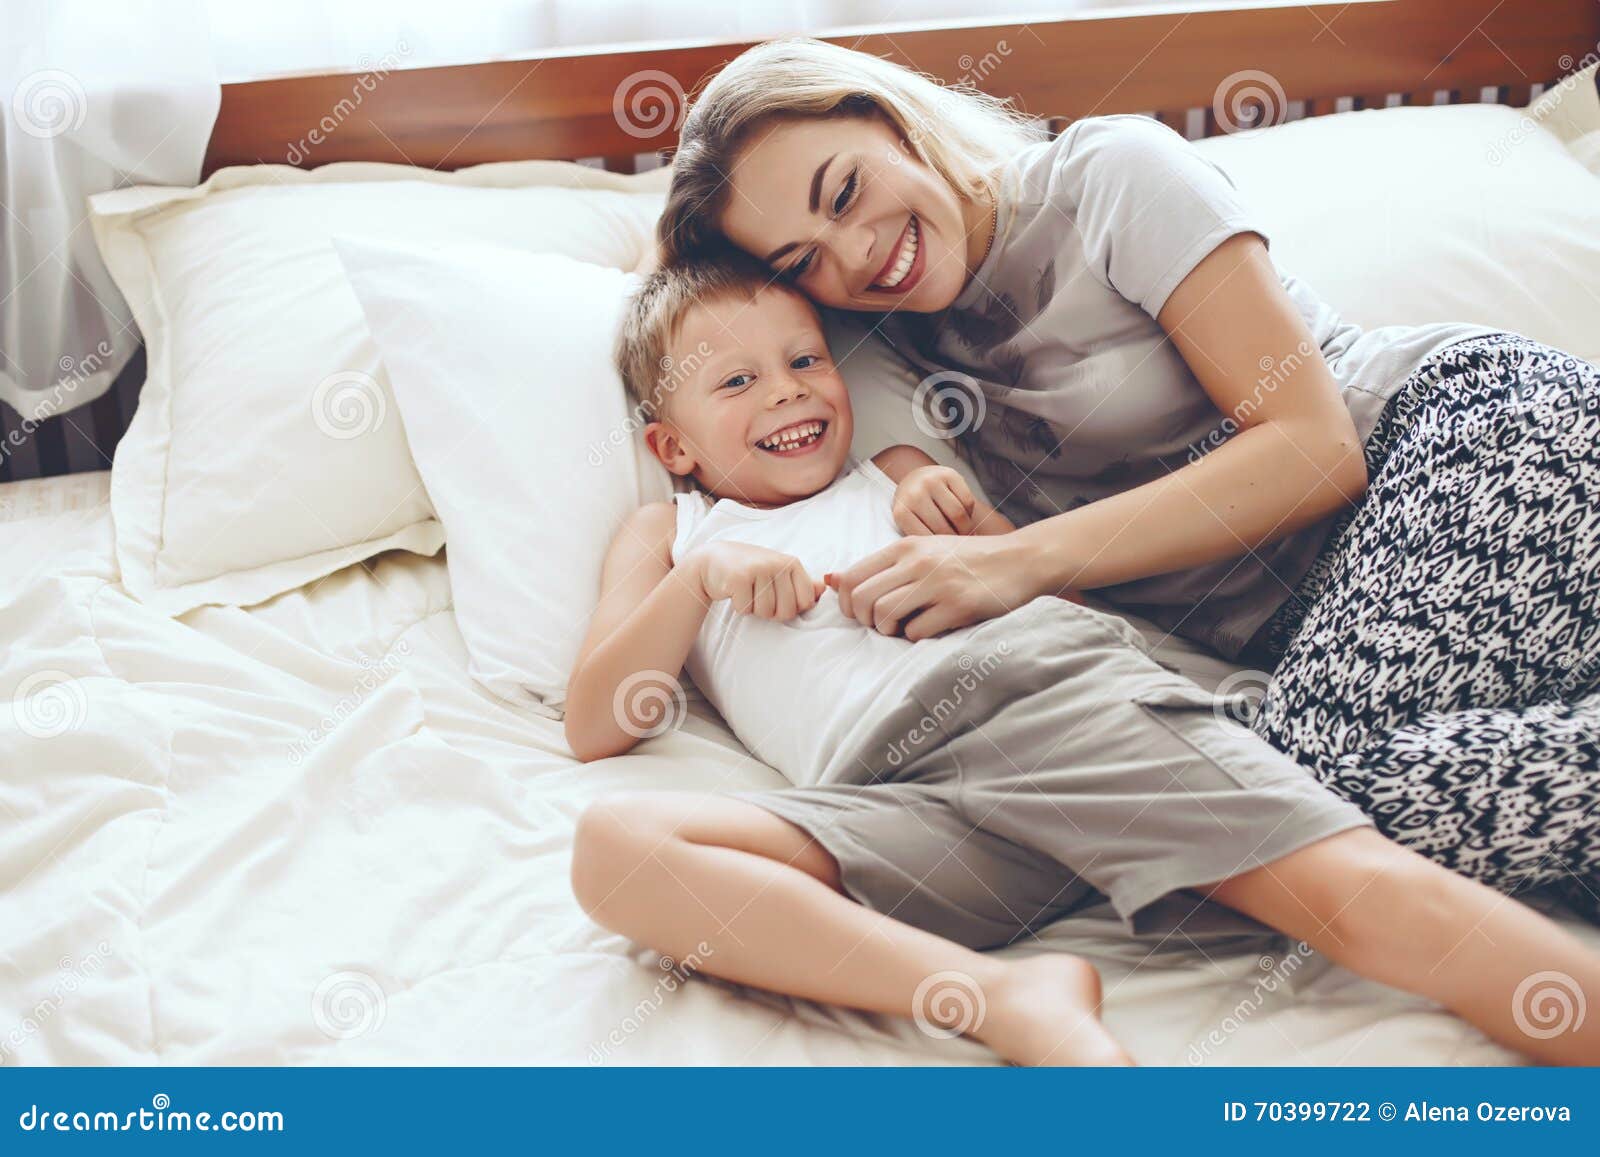 dawn case recommends mom and son in bed pic